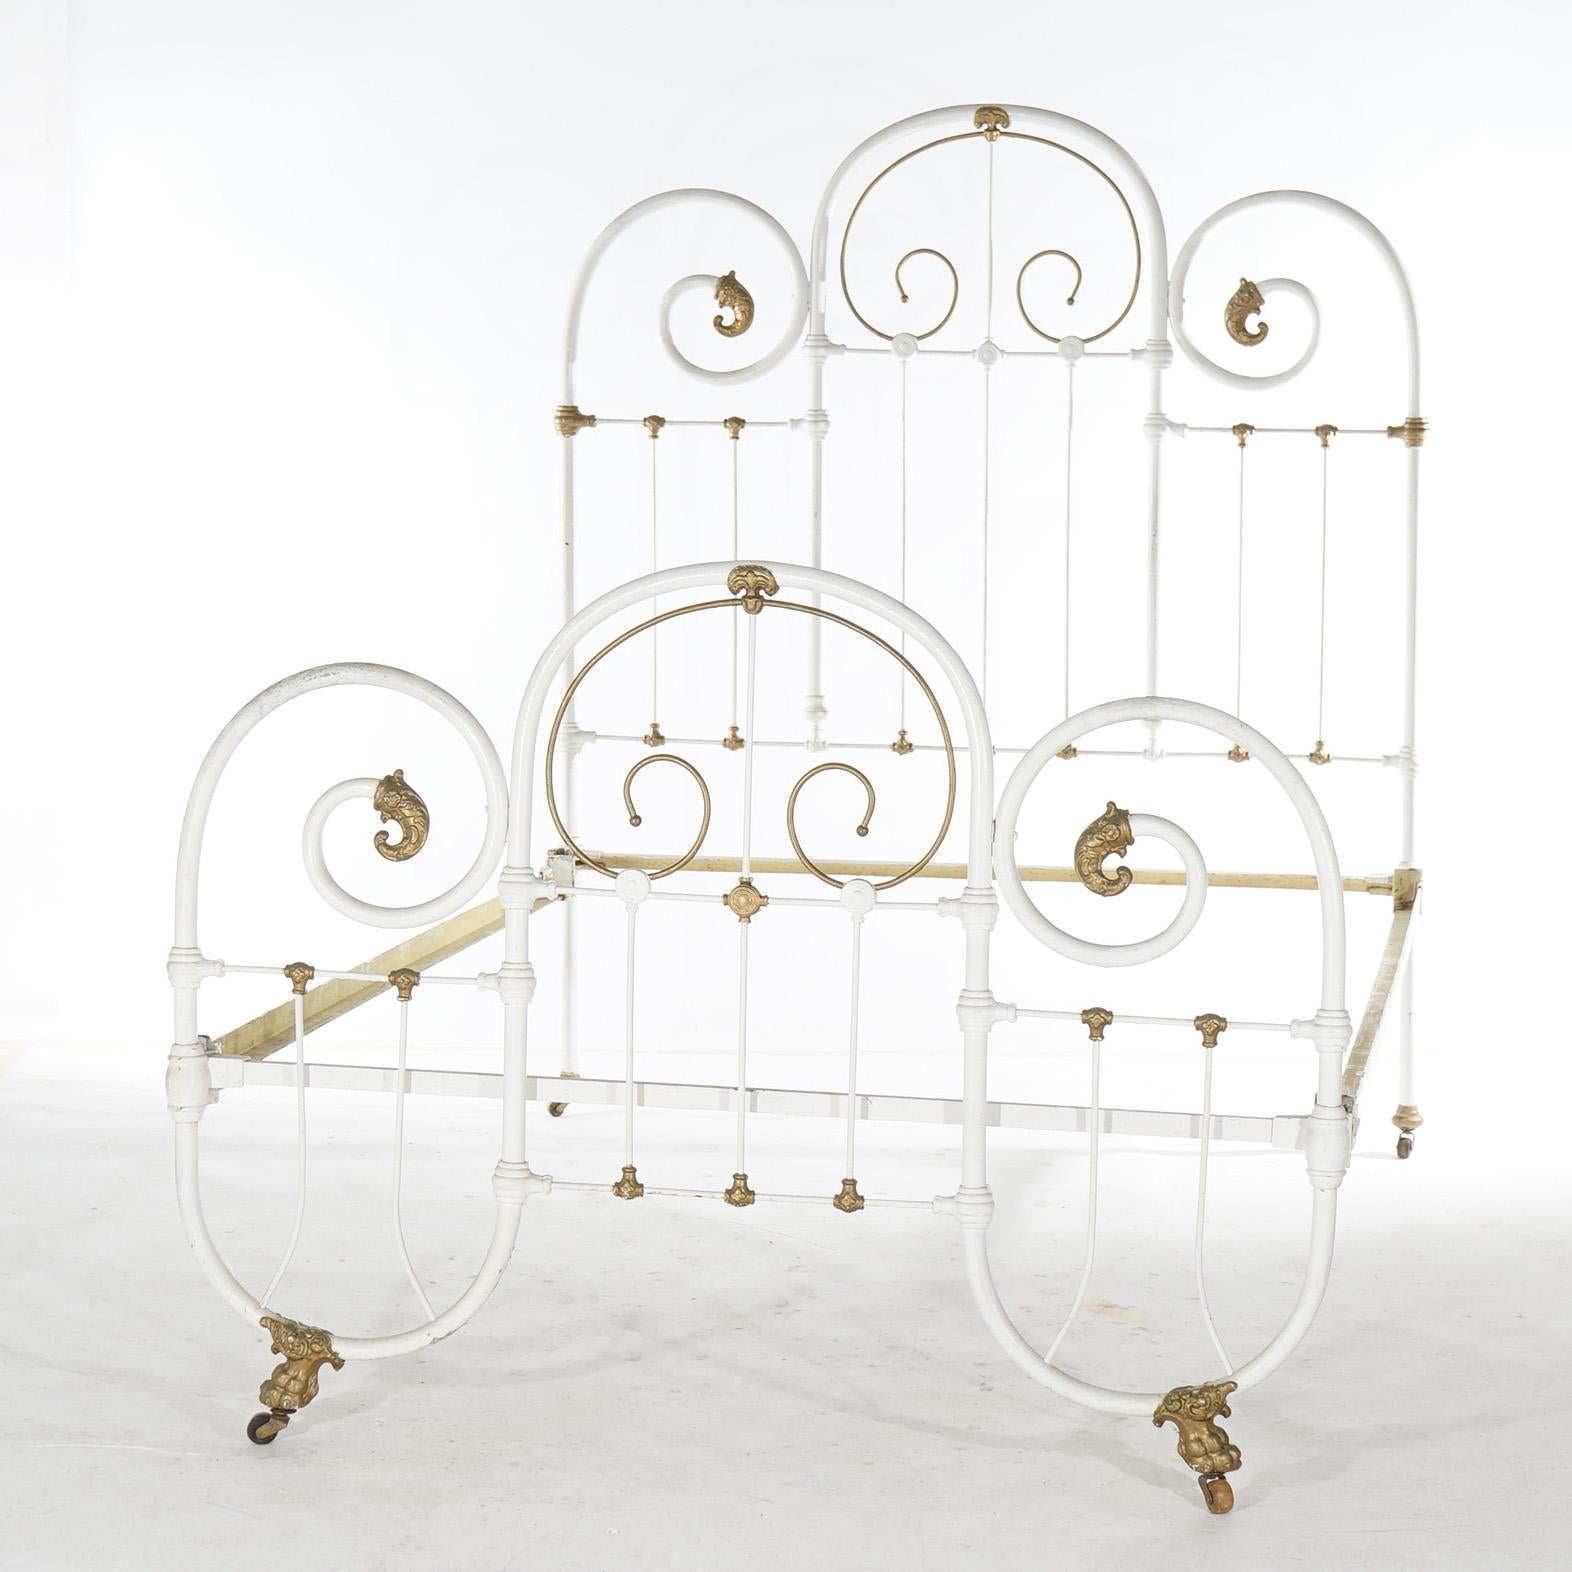 An antique Victorian double bed frame offers iron and brass scroll form frame, c1890

Measures - Headboard 64.5